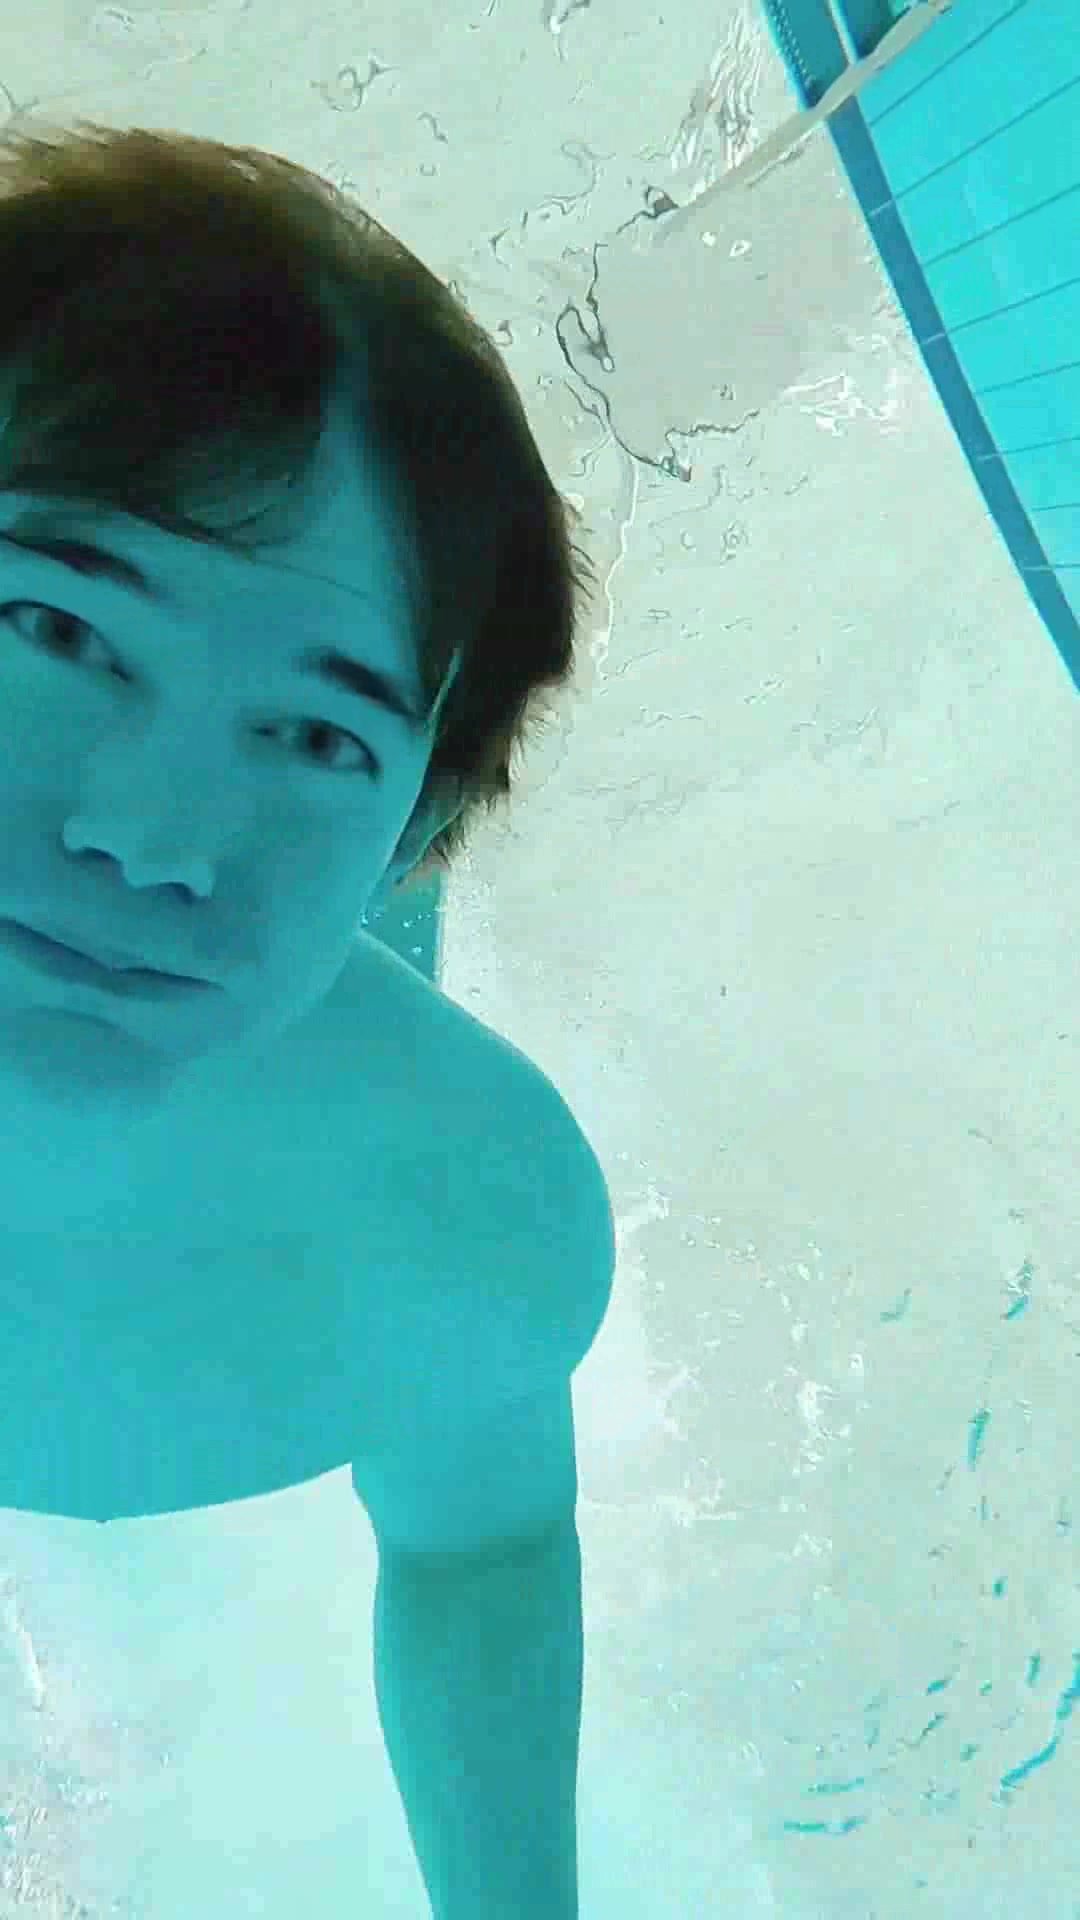 Putting a mask underwater in pool